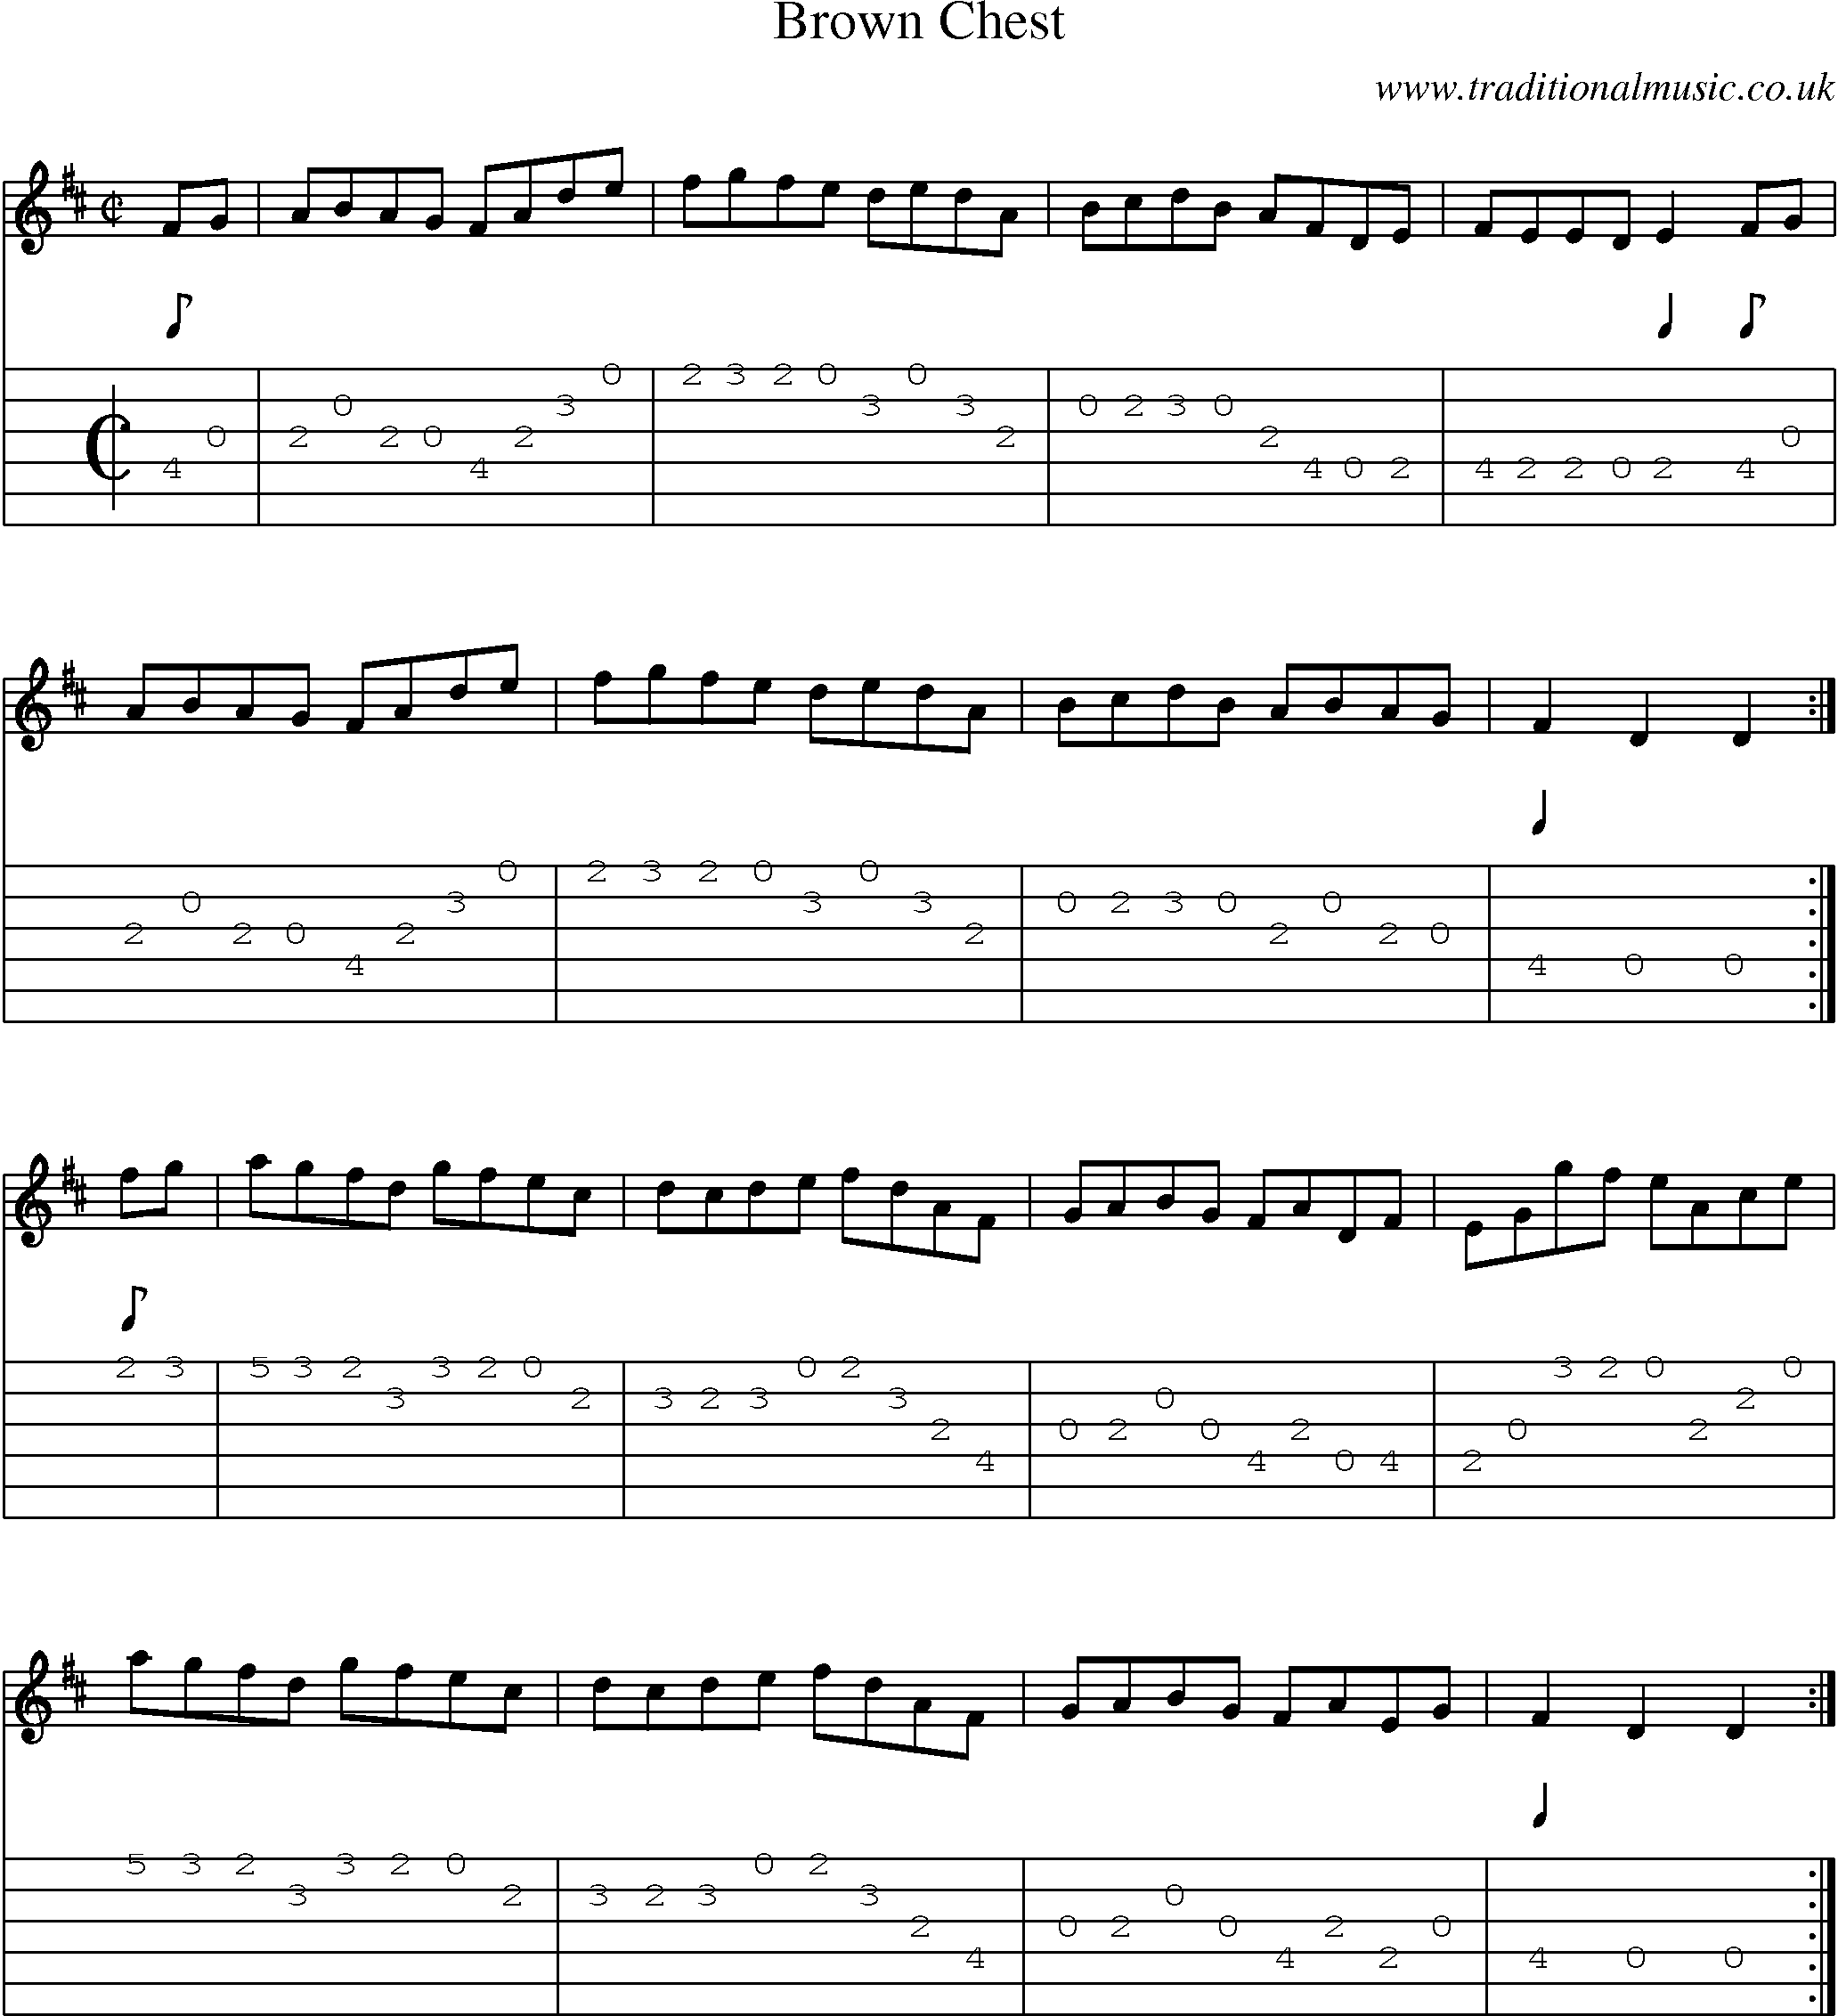 Music Score and Guitar Tabs for Brown Chest